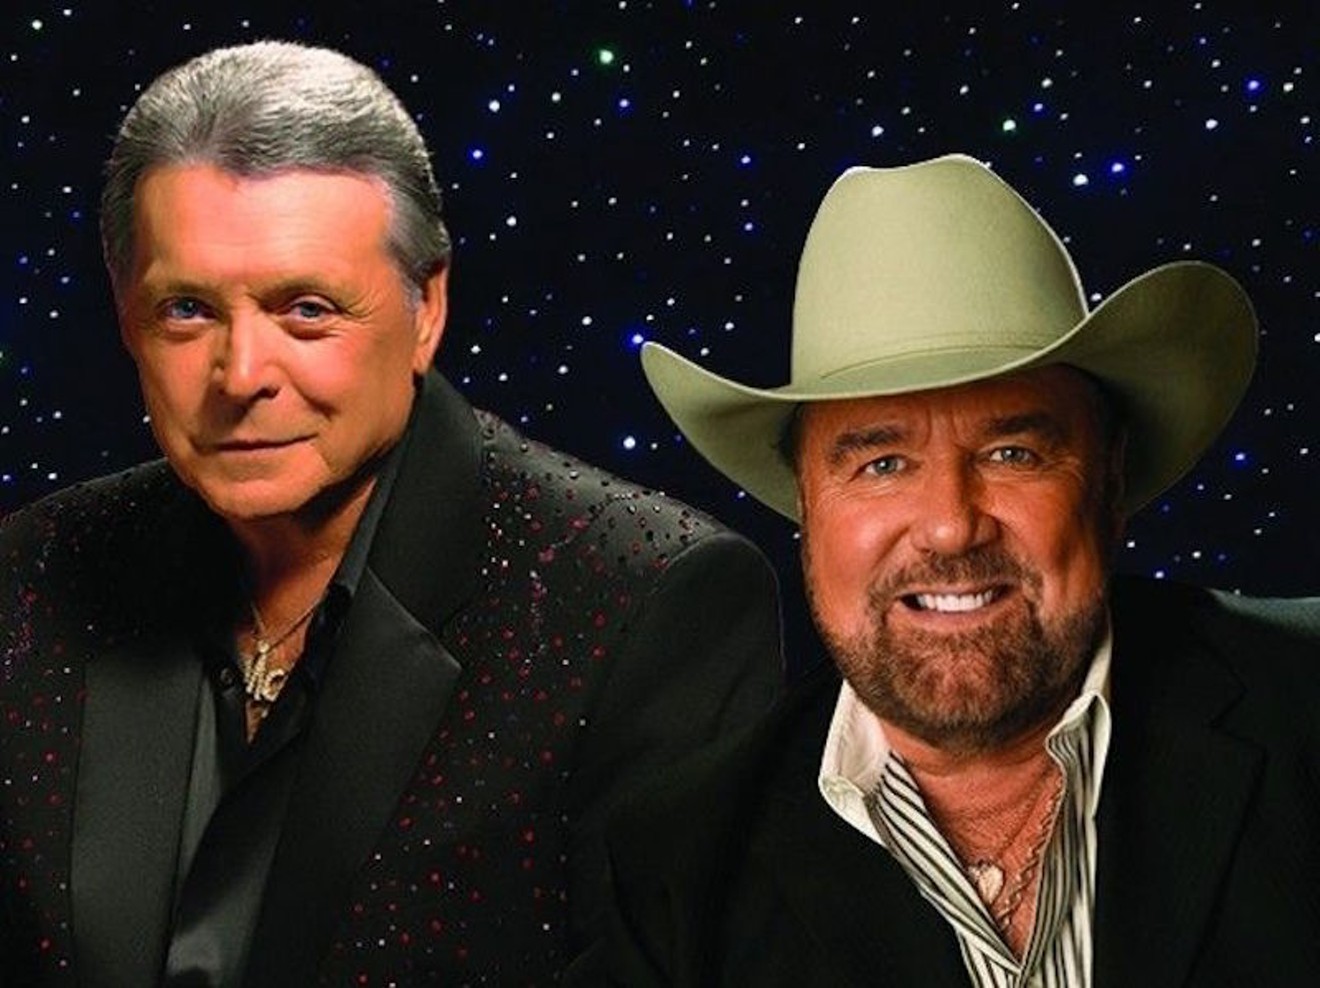 Texas legends Mickey Gilley and Johnny Lee pick up their Urban Cowboy Reunion tour with a stop at The Dosey Doe in the Woodlands on Tuesday, July 13.